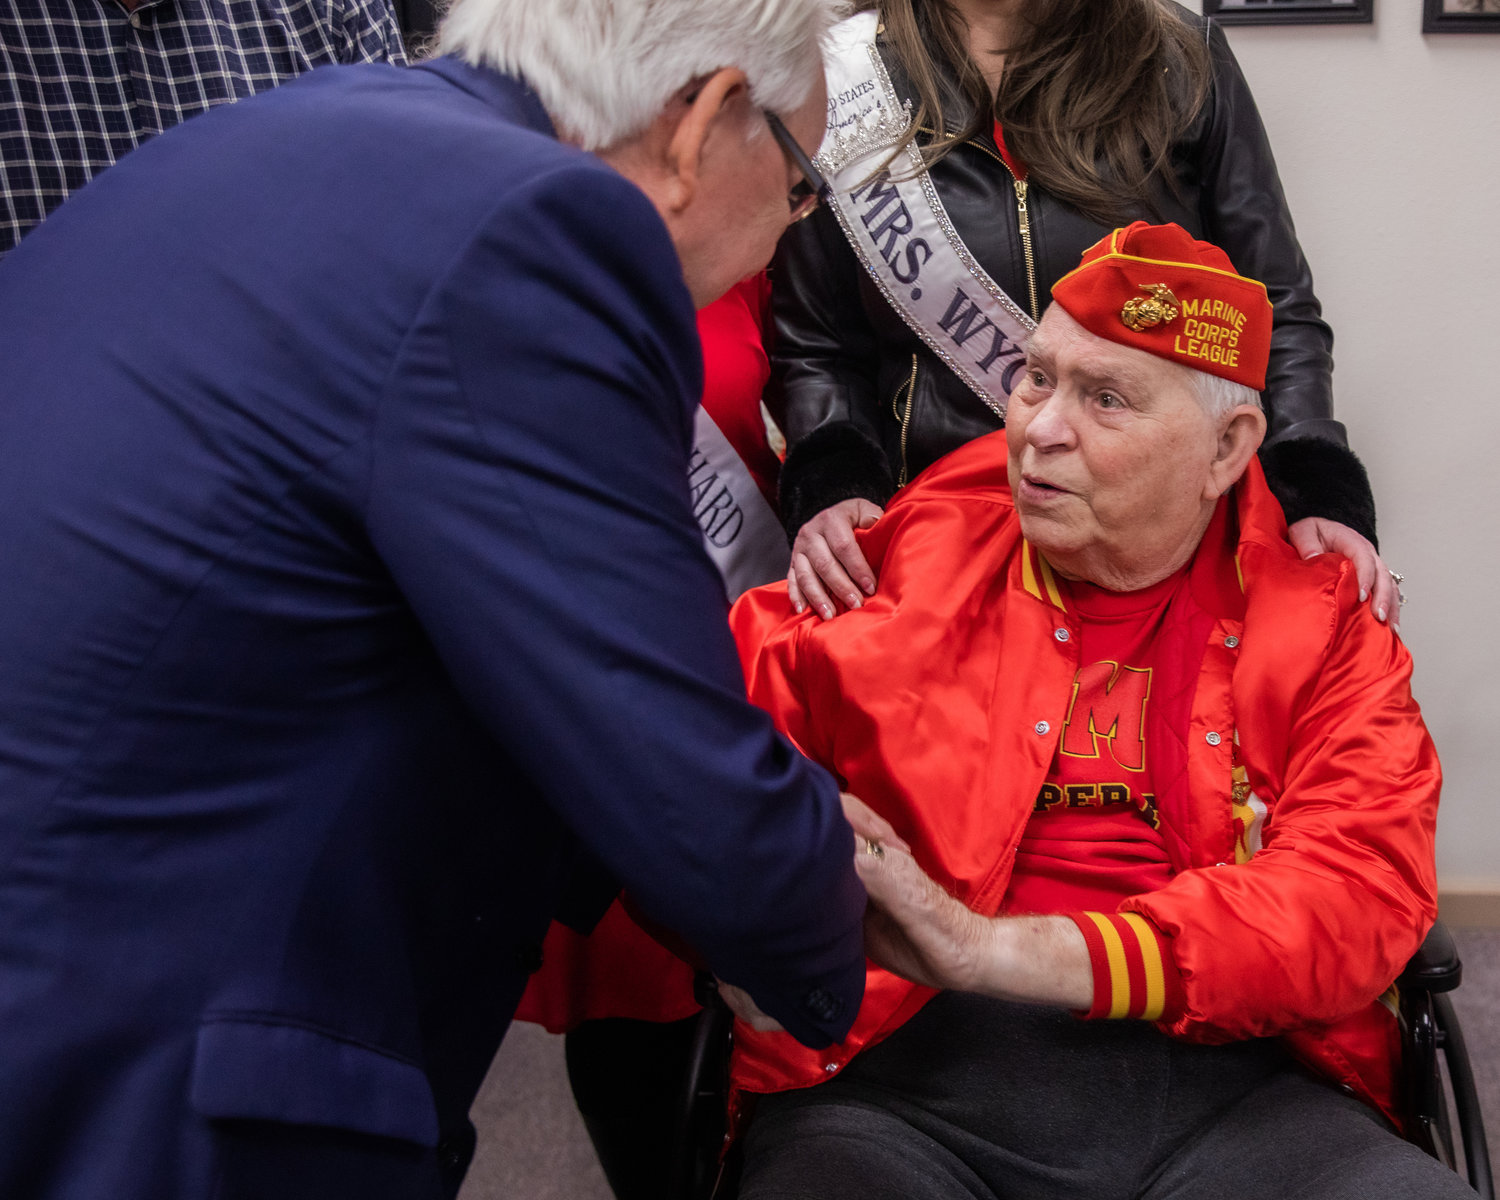 Lee Grimes, left, shakes the hand of Jack Williams, a Marine, on Veterans Day during the 25th anniversary of the Veterans Memorial Museum in Chehalis.